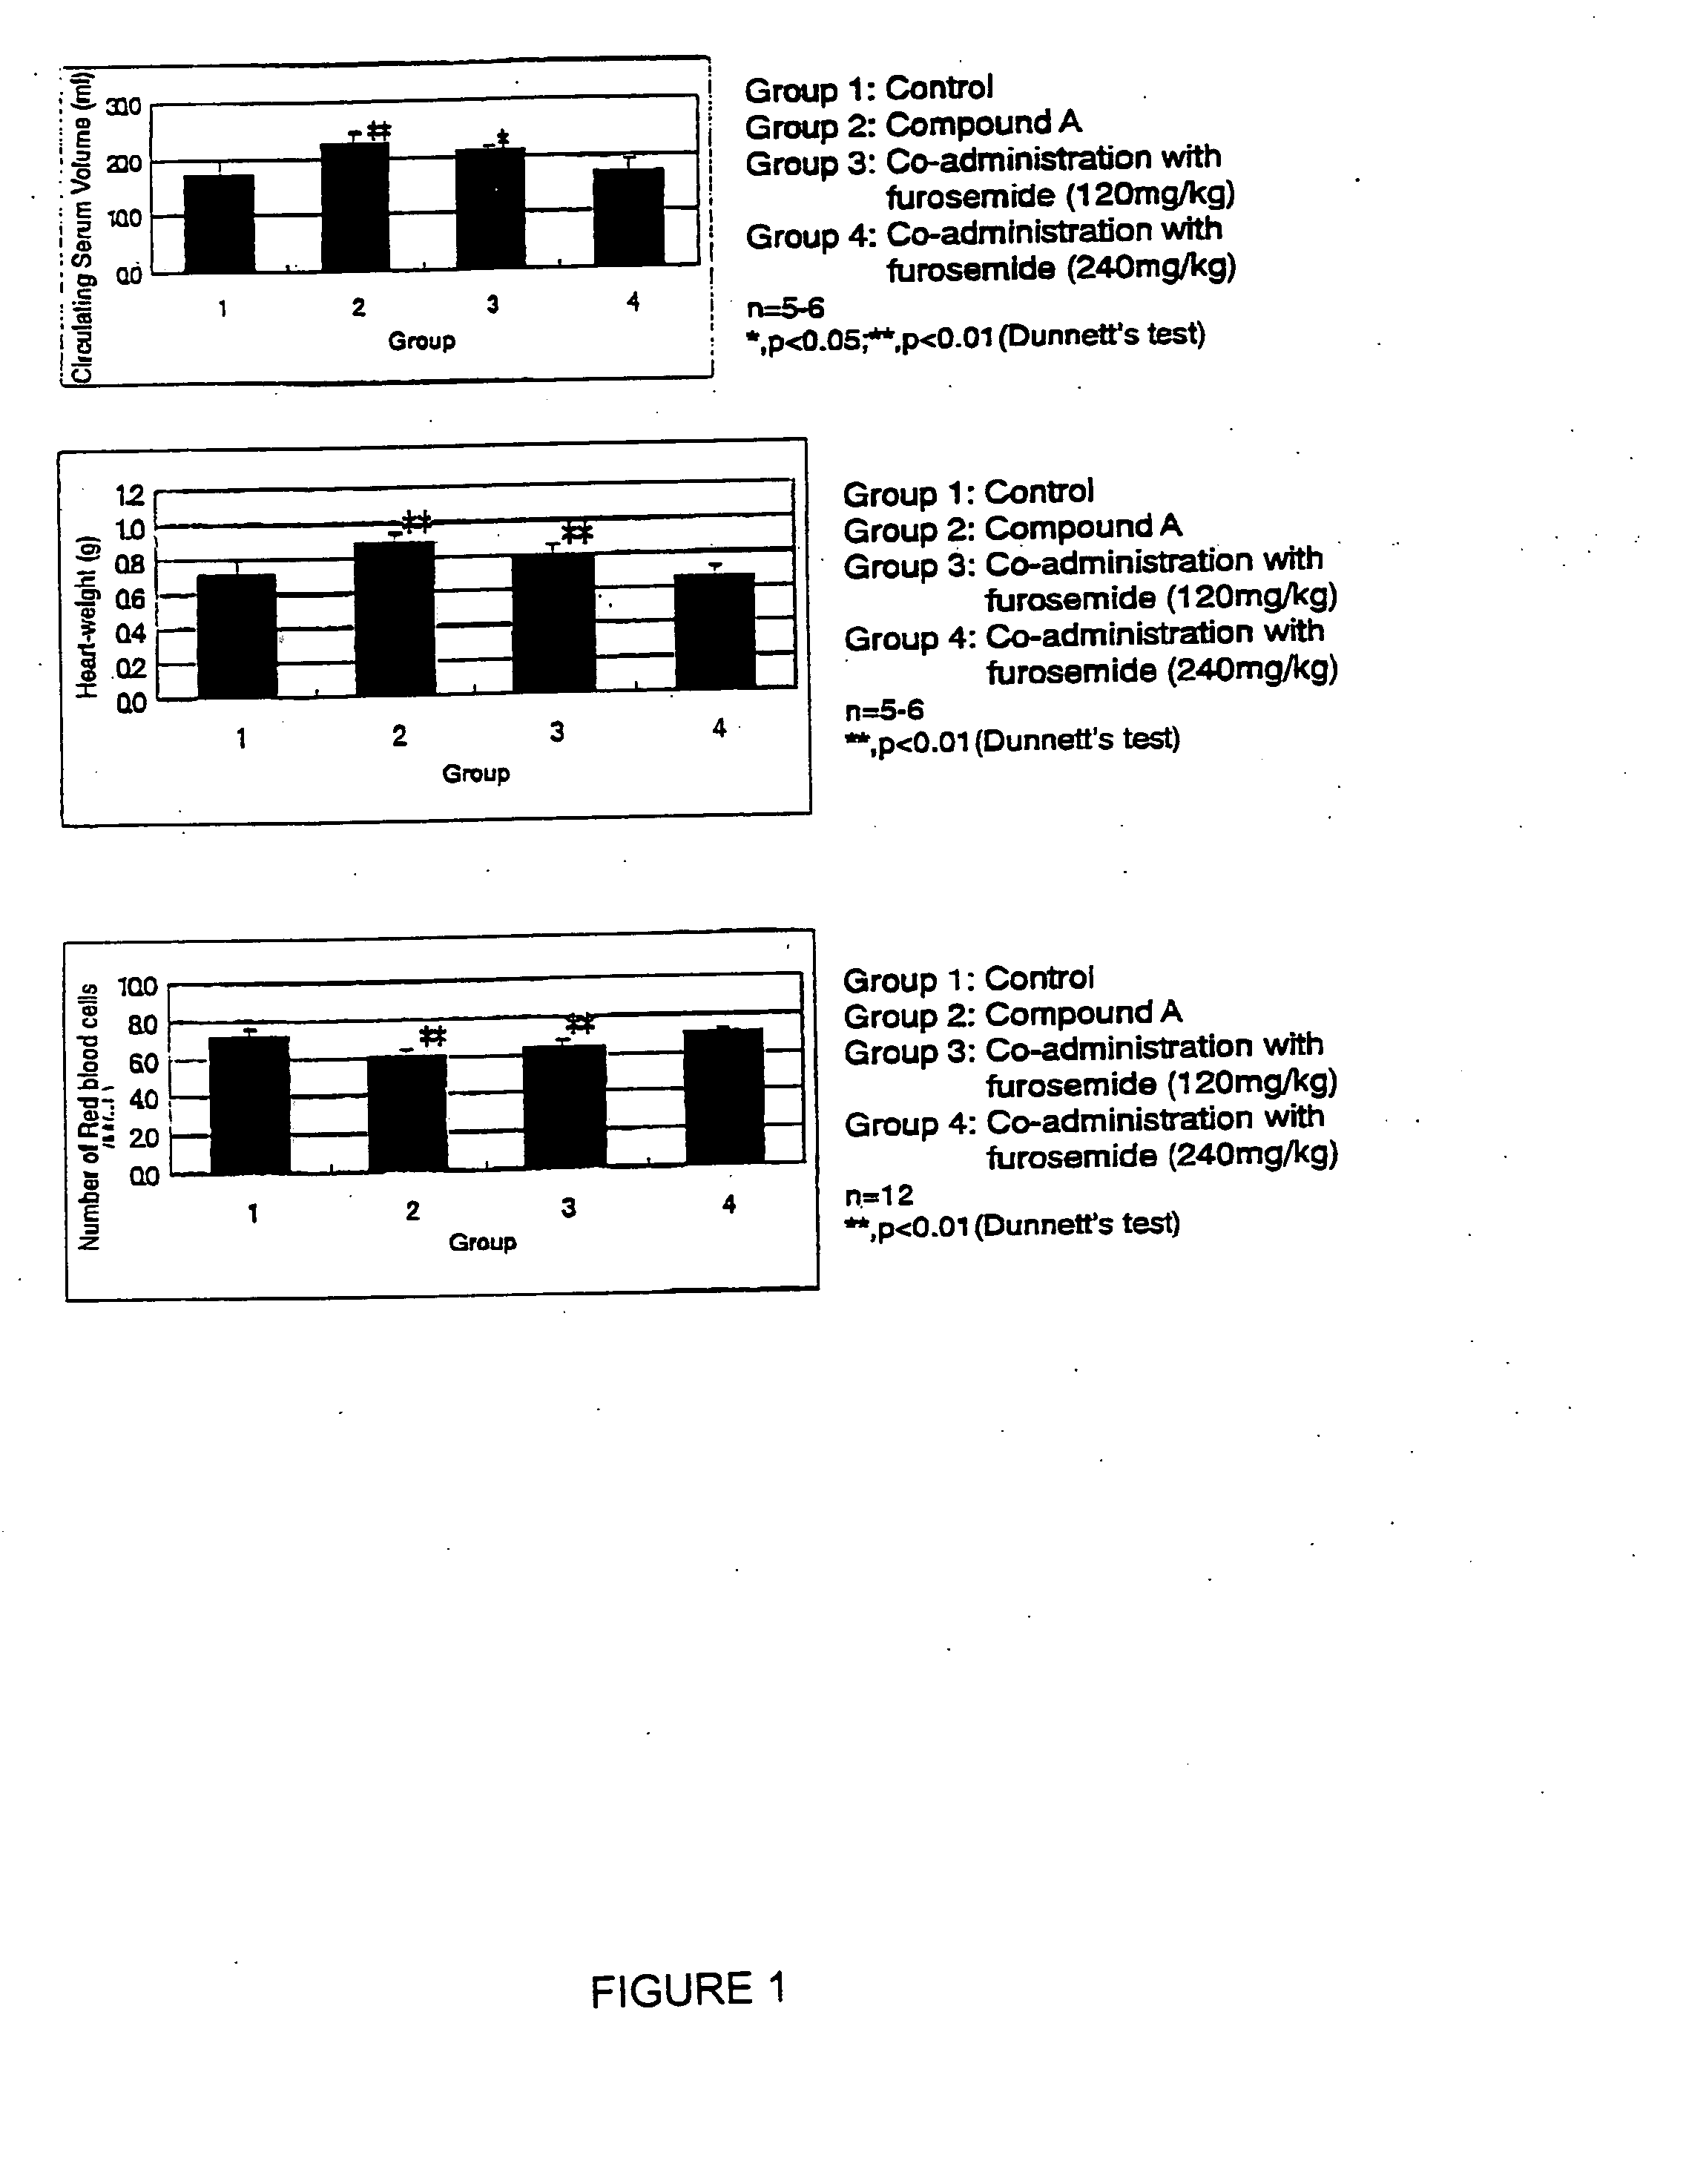 Medicinal compositions containing diuretic and insulin resistance-improving agent